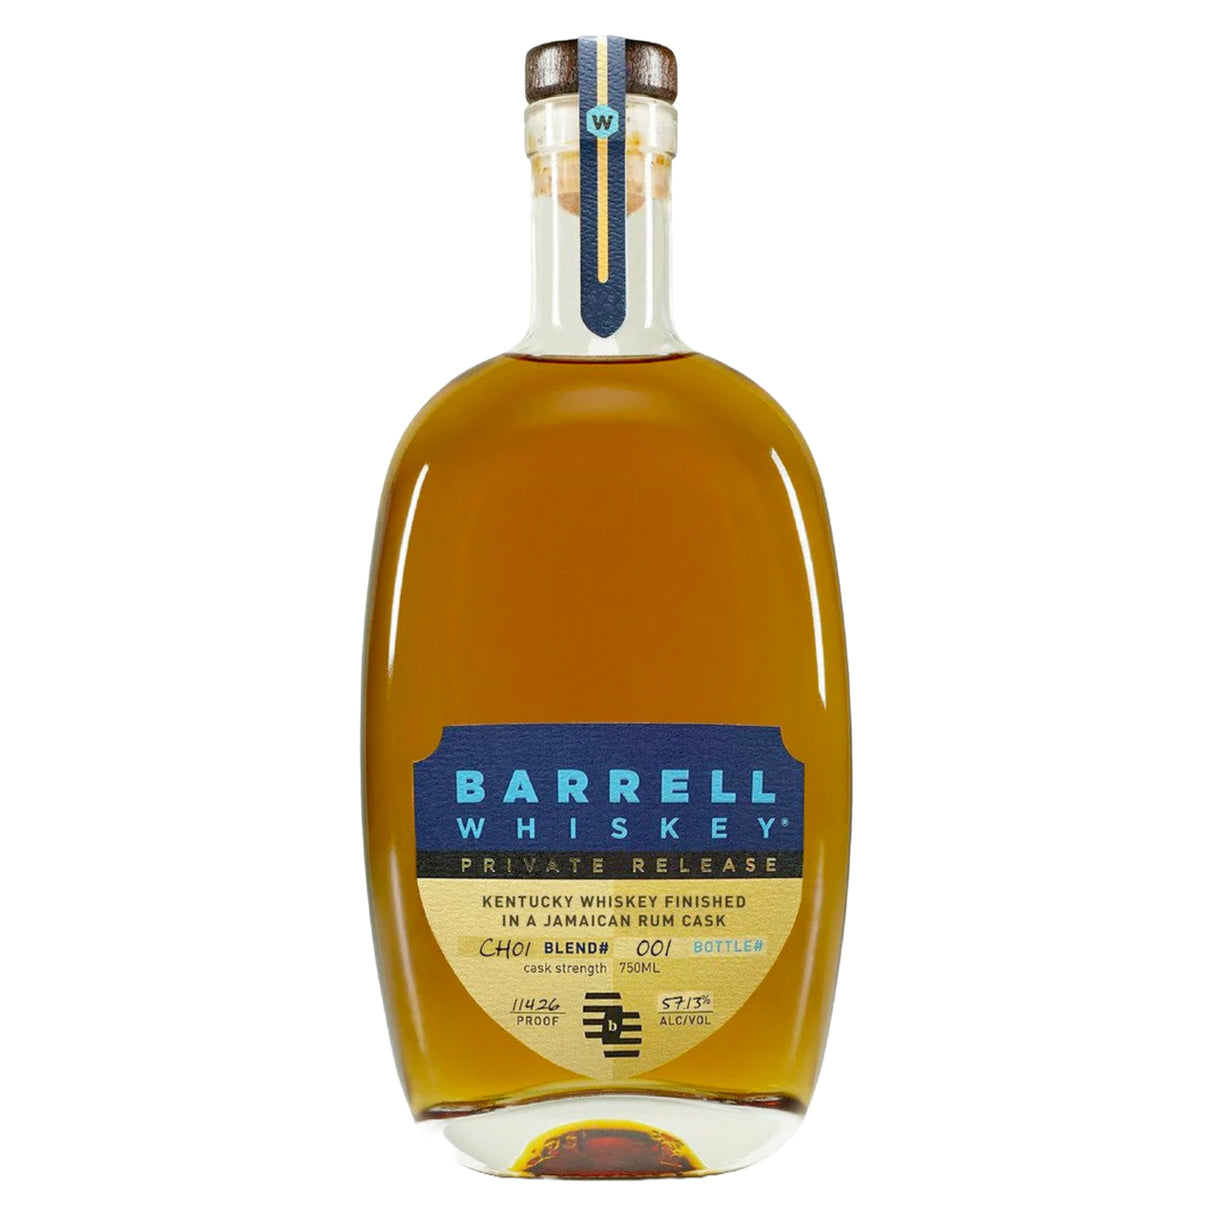 Barrell Craft Spirits Private Release Kentucky Whiskey Finished in Jamaican Rum Cask - De Wine Spot | DWS - Drams/Whiskey, Wines, Sake